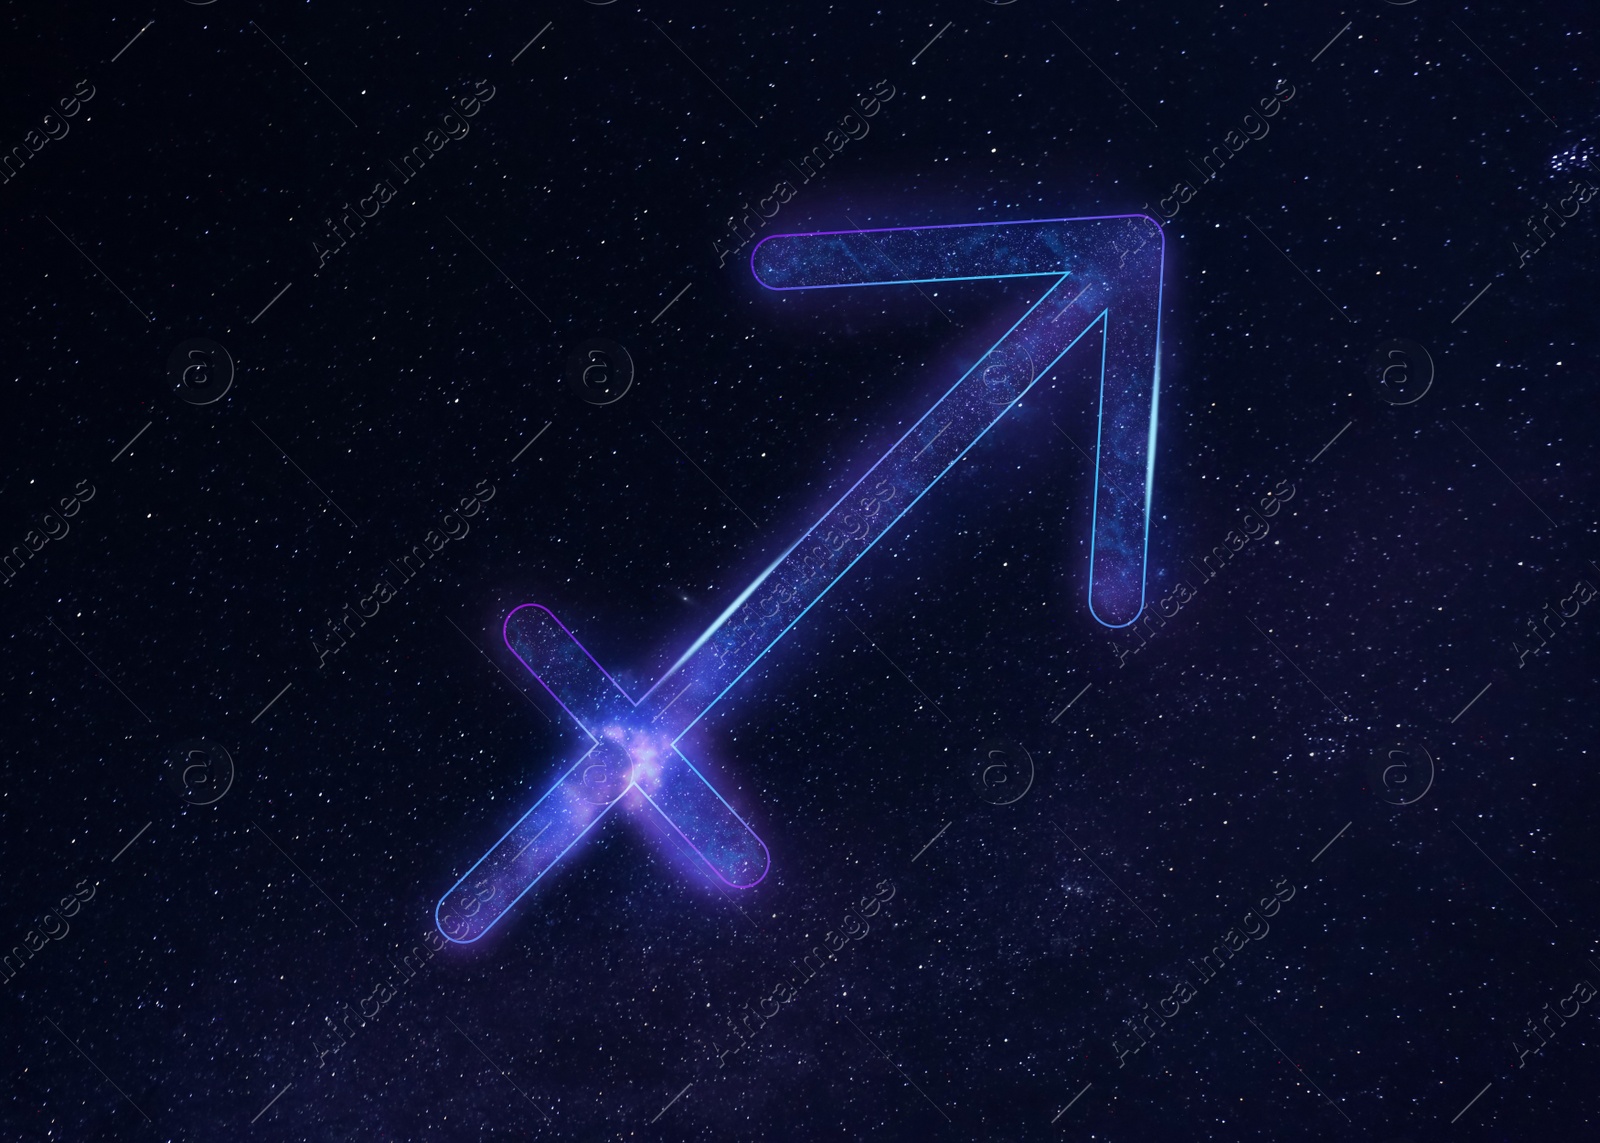 Illustration of Sagittarius astrological sign in night sky with beautiful sky